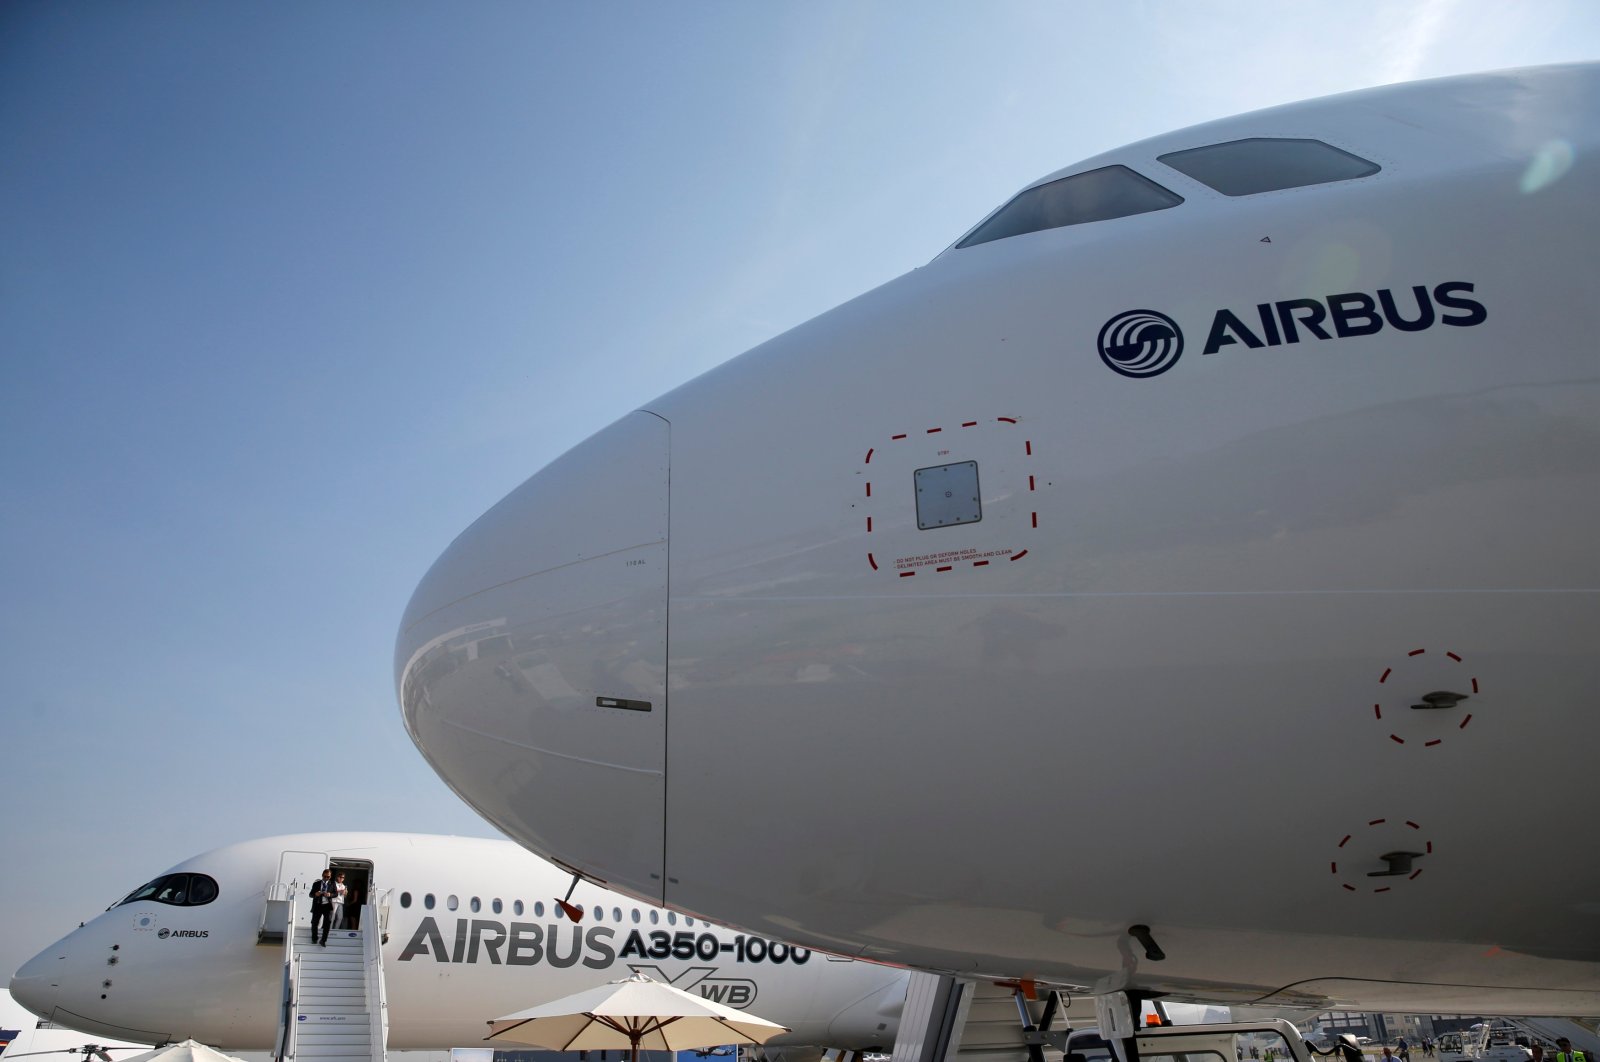 An Airbus A3501000 Xwb and an Airbus A321neo are seen on static display during the 52nd Paris Air Show at Le Bourget Airport near Paris, France, July 23, 2017. (Reuters Photo)